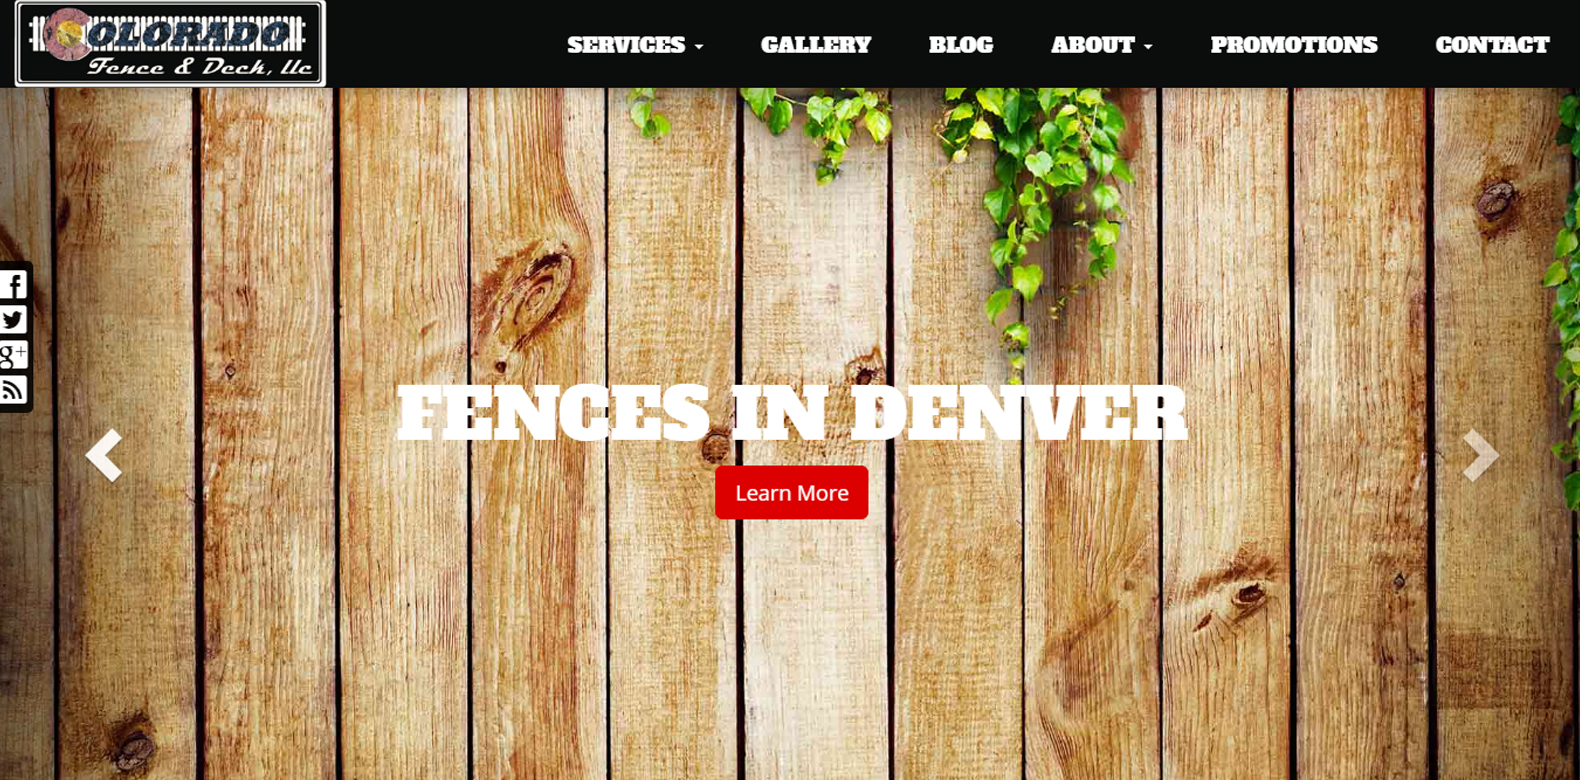 
New Website Launched: Colorado Fence & Deck